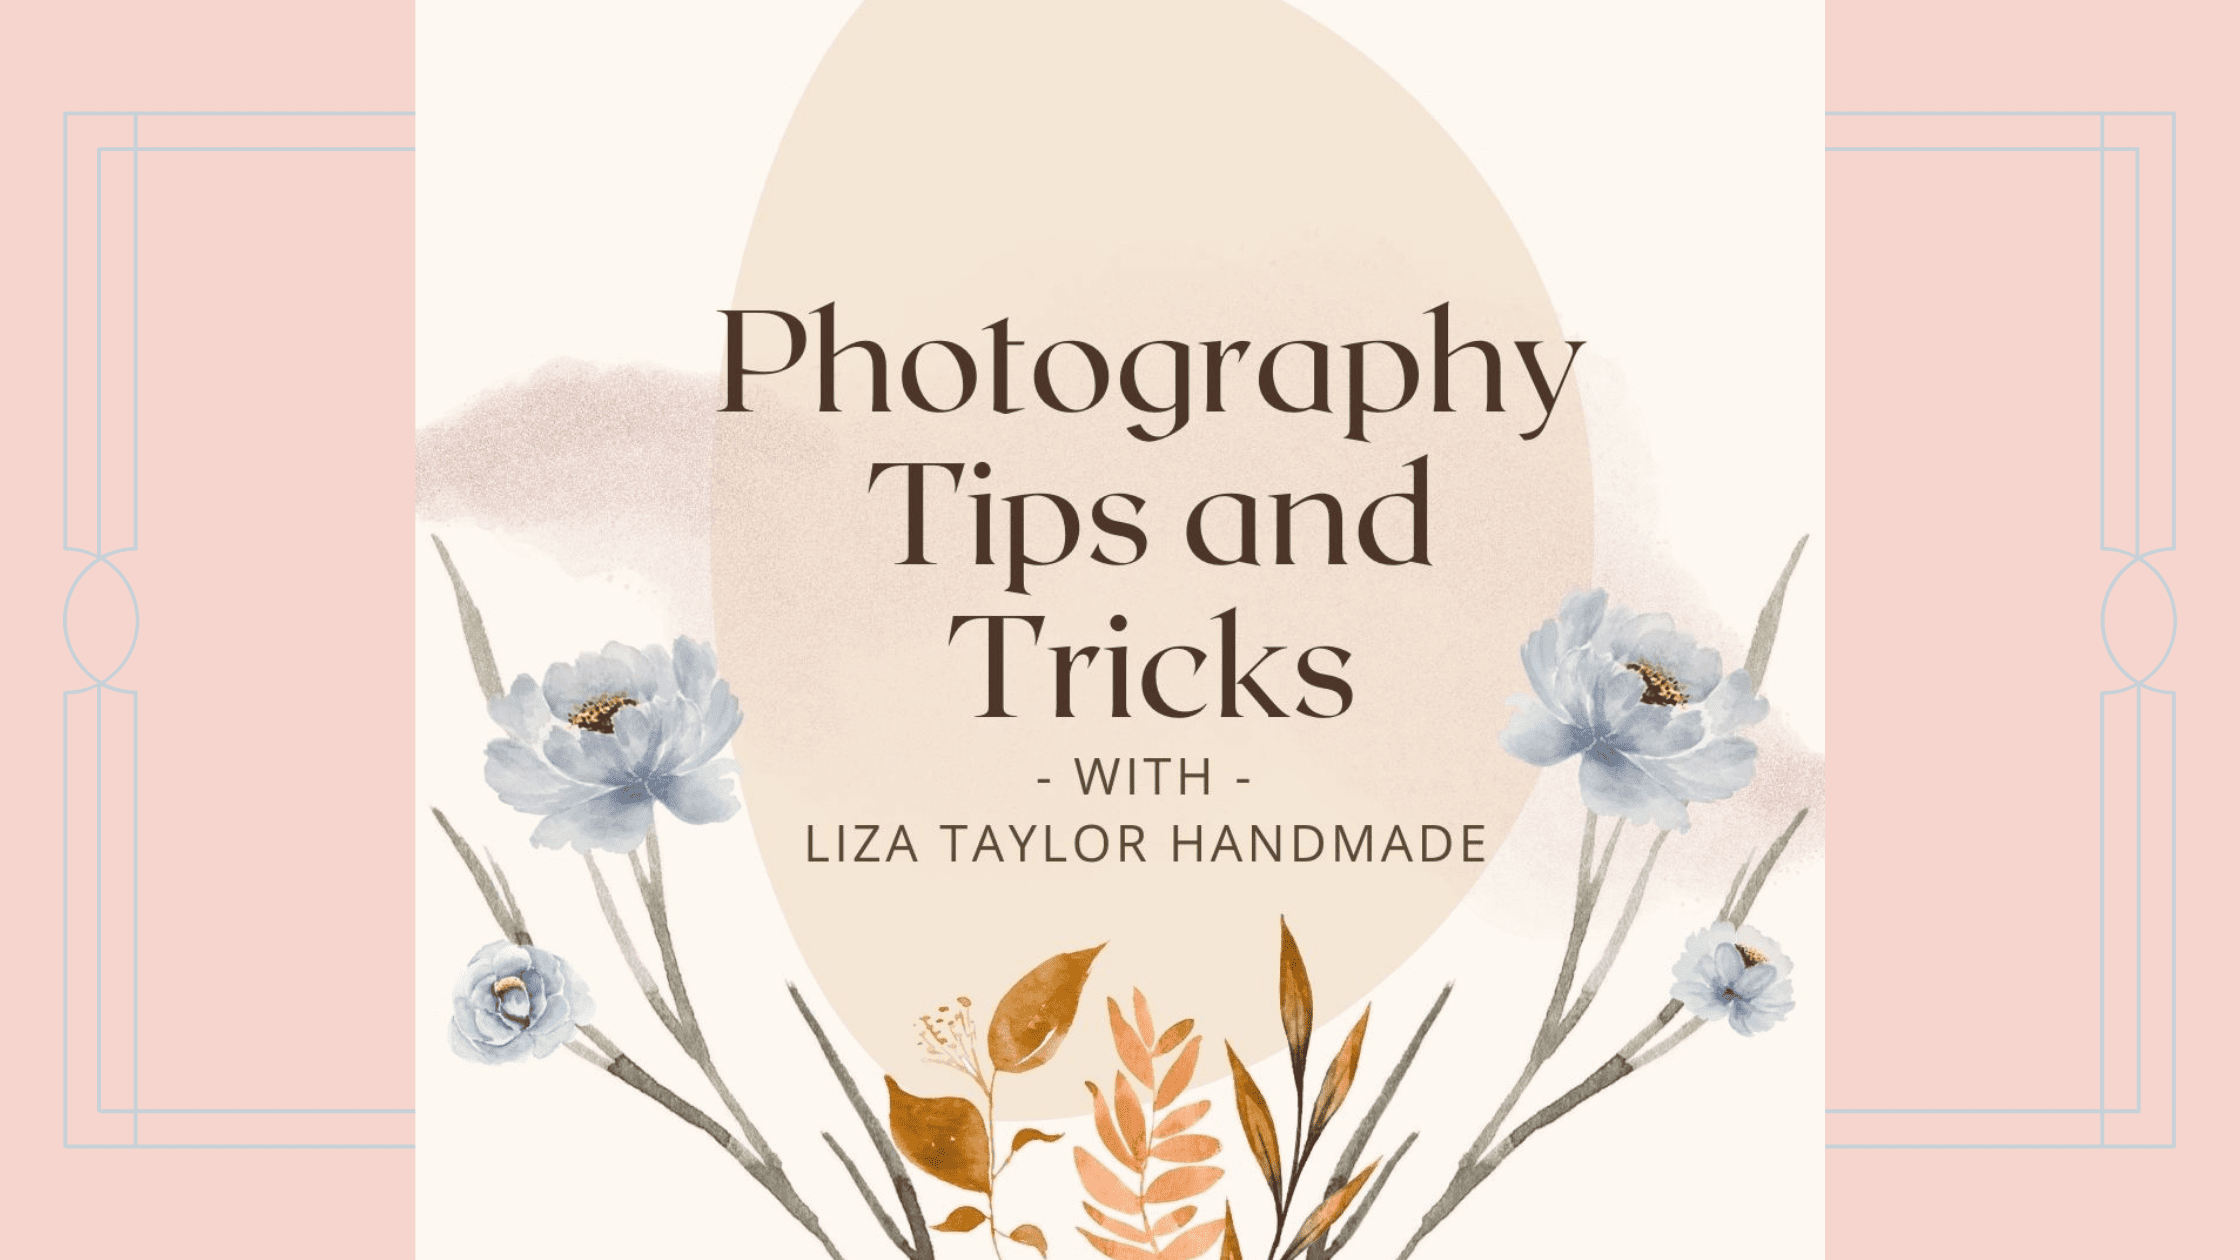 Photography Tips and Tricks with Liza Taylor Handmade